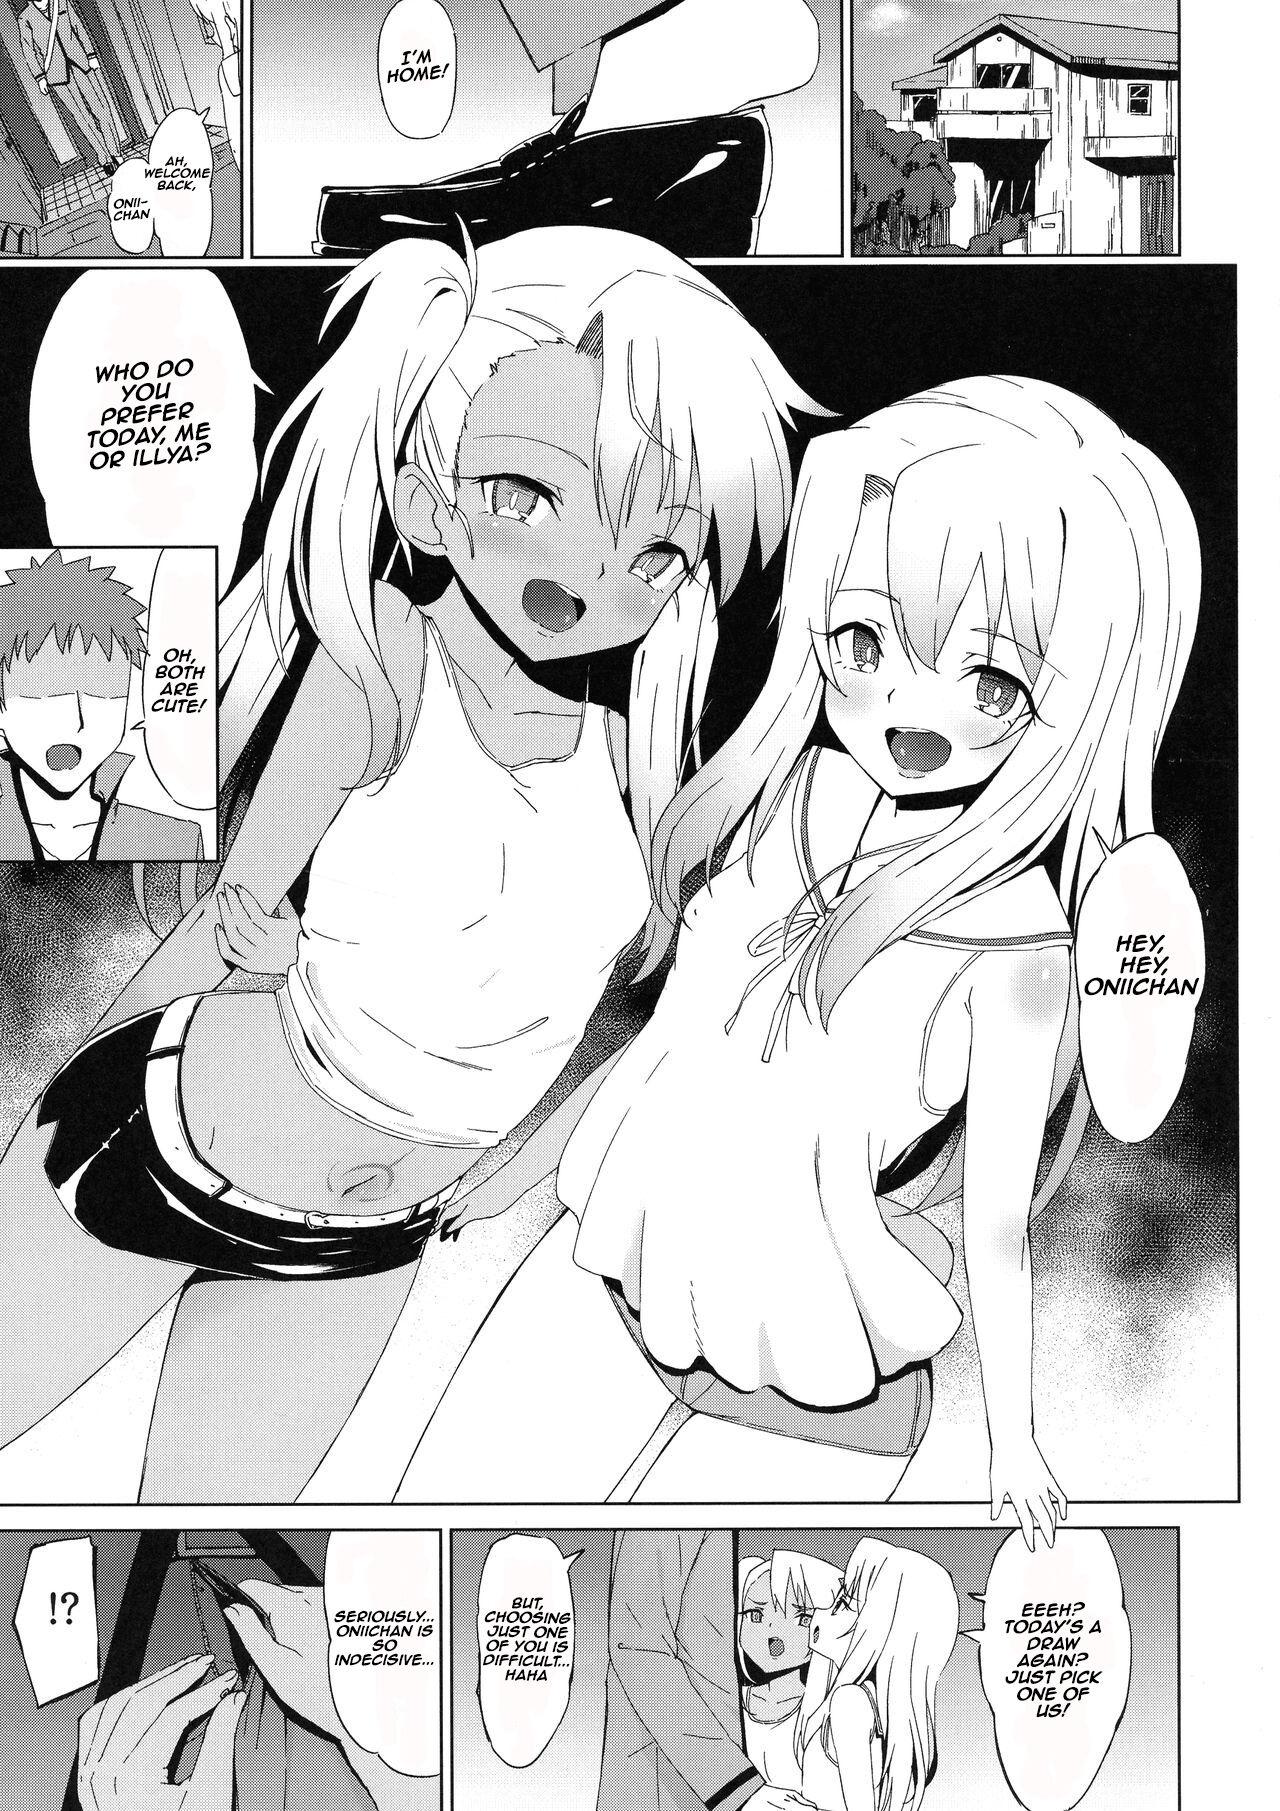 Jerking Off Oshiete Onii-chan - Fate kaleid liner prisma illya Perra - Page 3